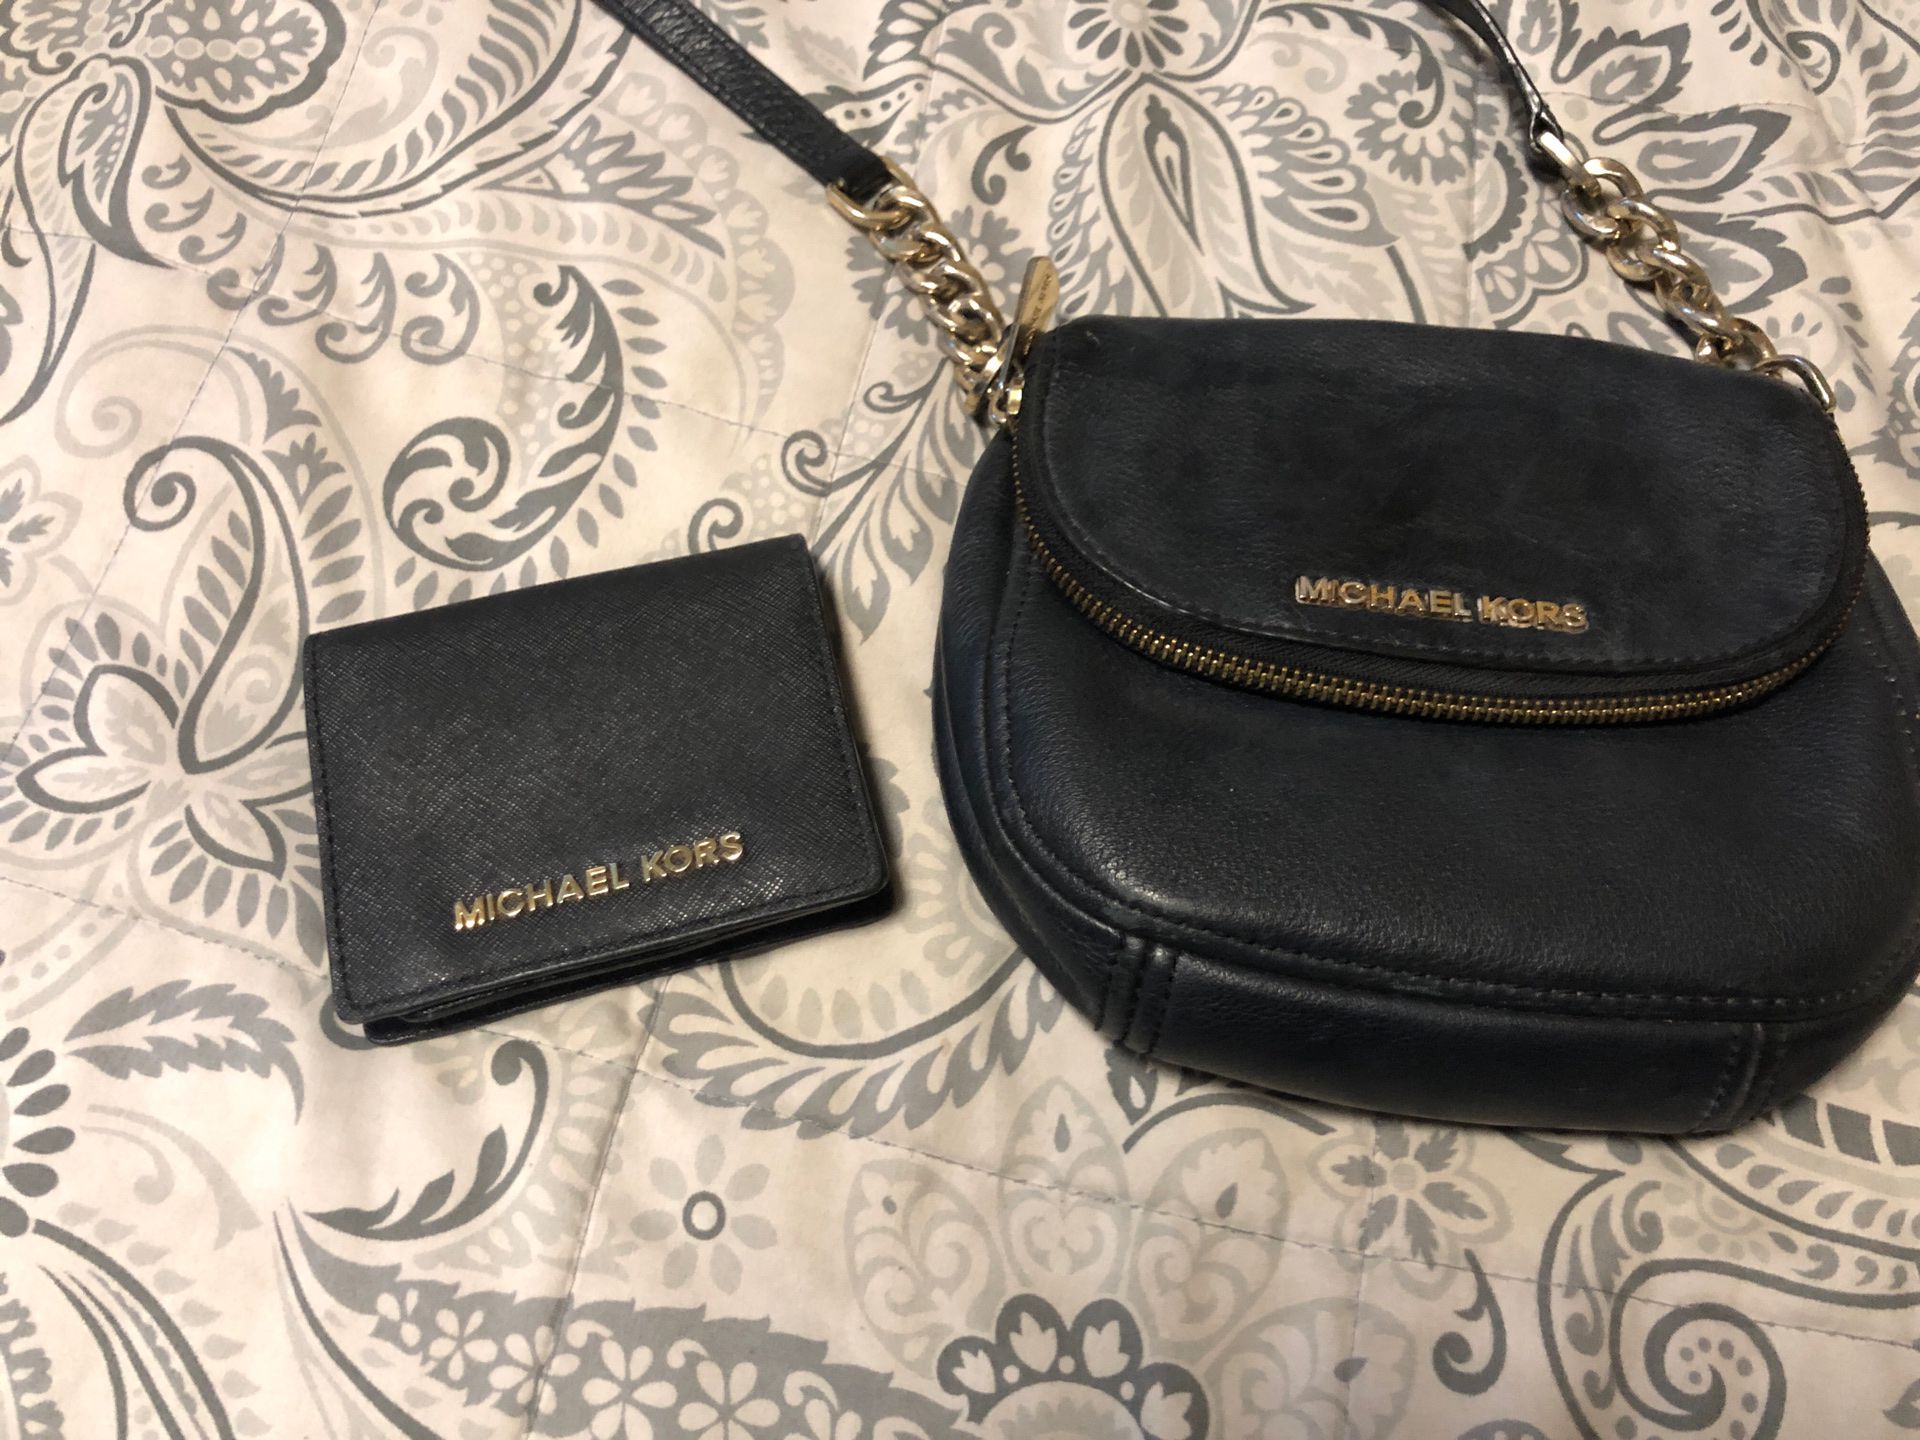 Small Mk purse and wallet